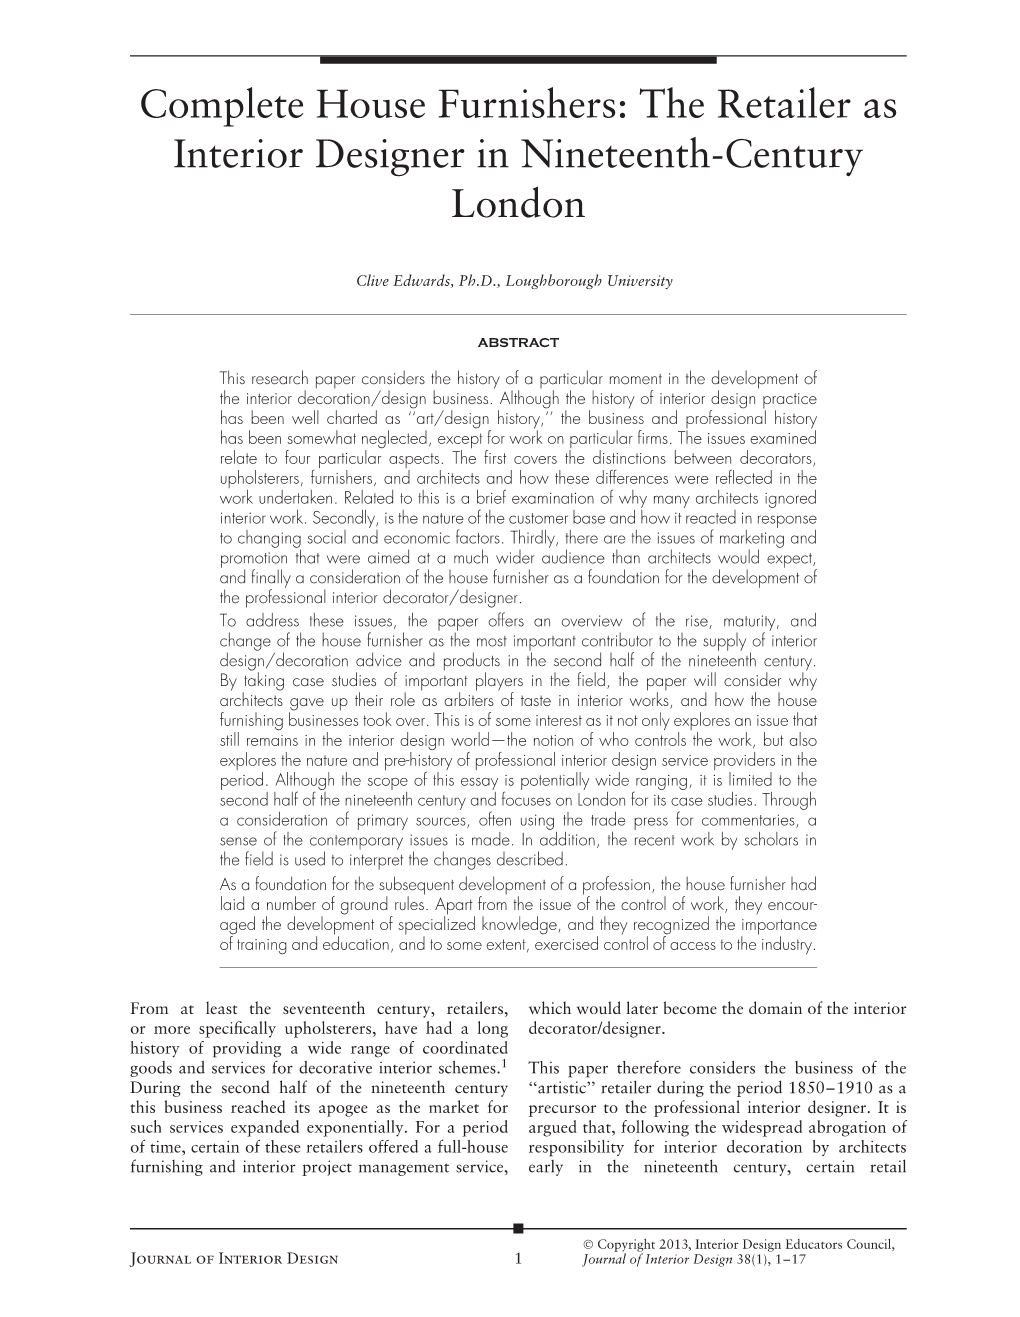 Complete House Furnishers: the Retailer As Interior Designer in Nineteenth-Century London